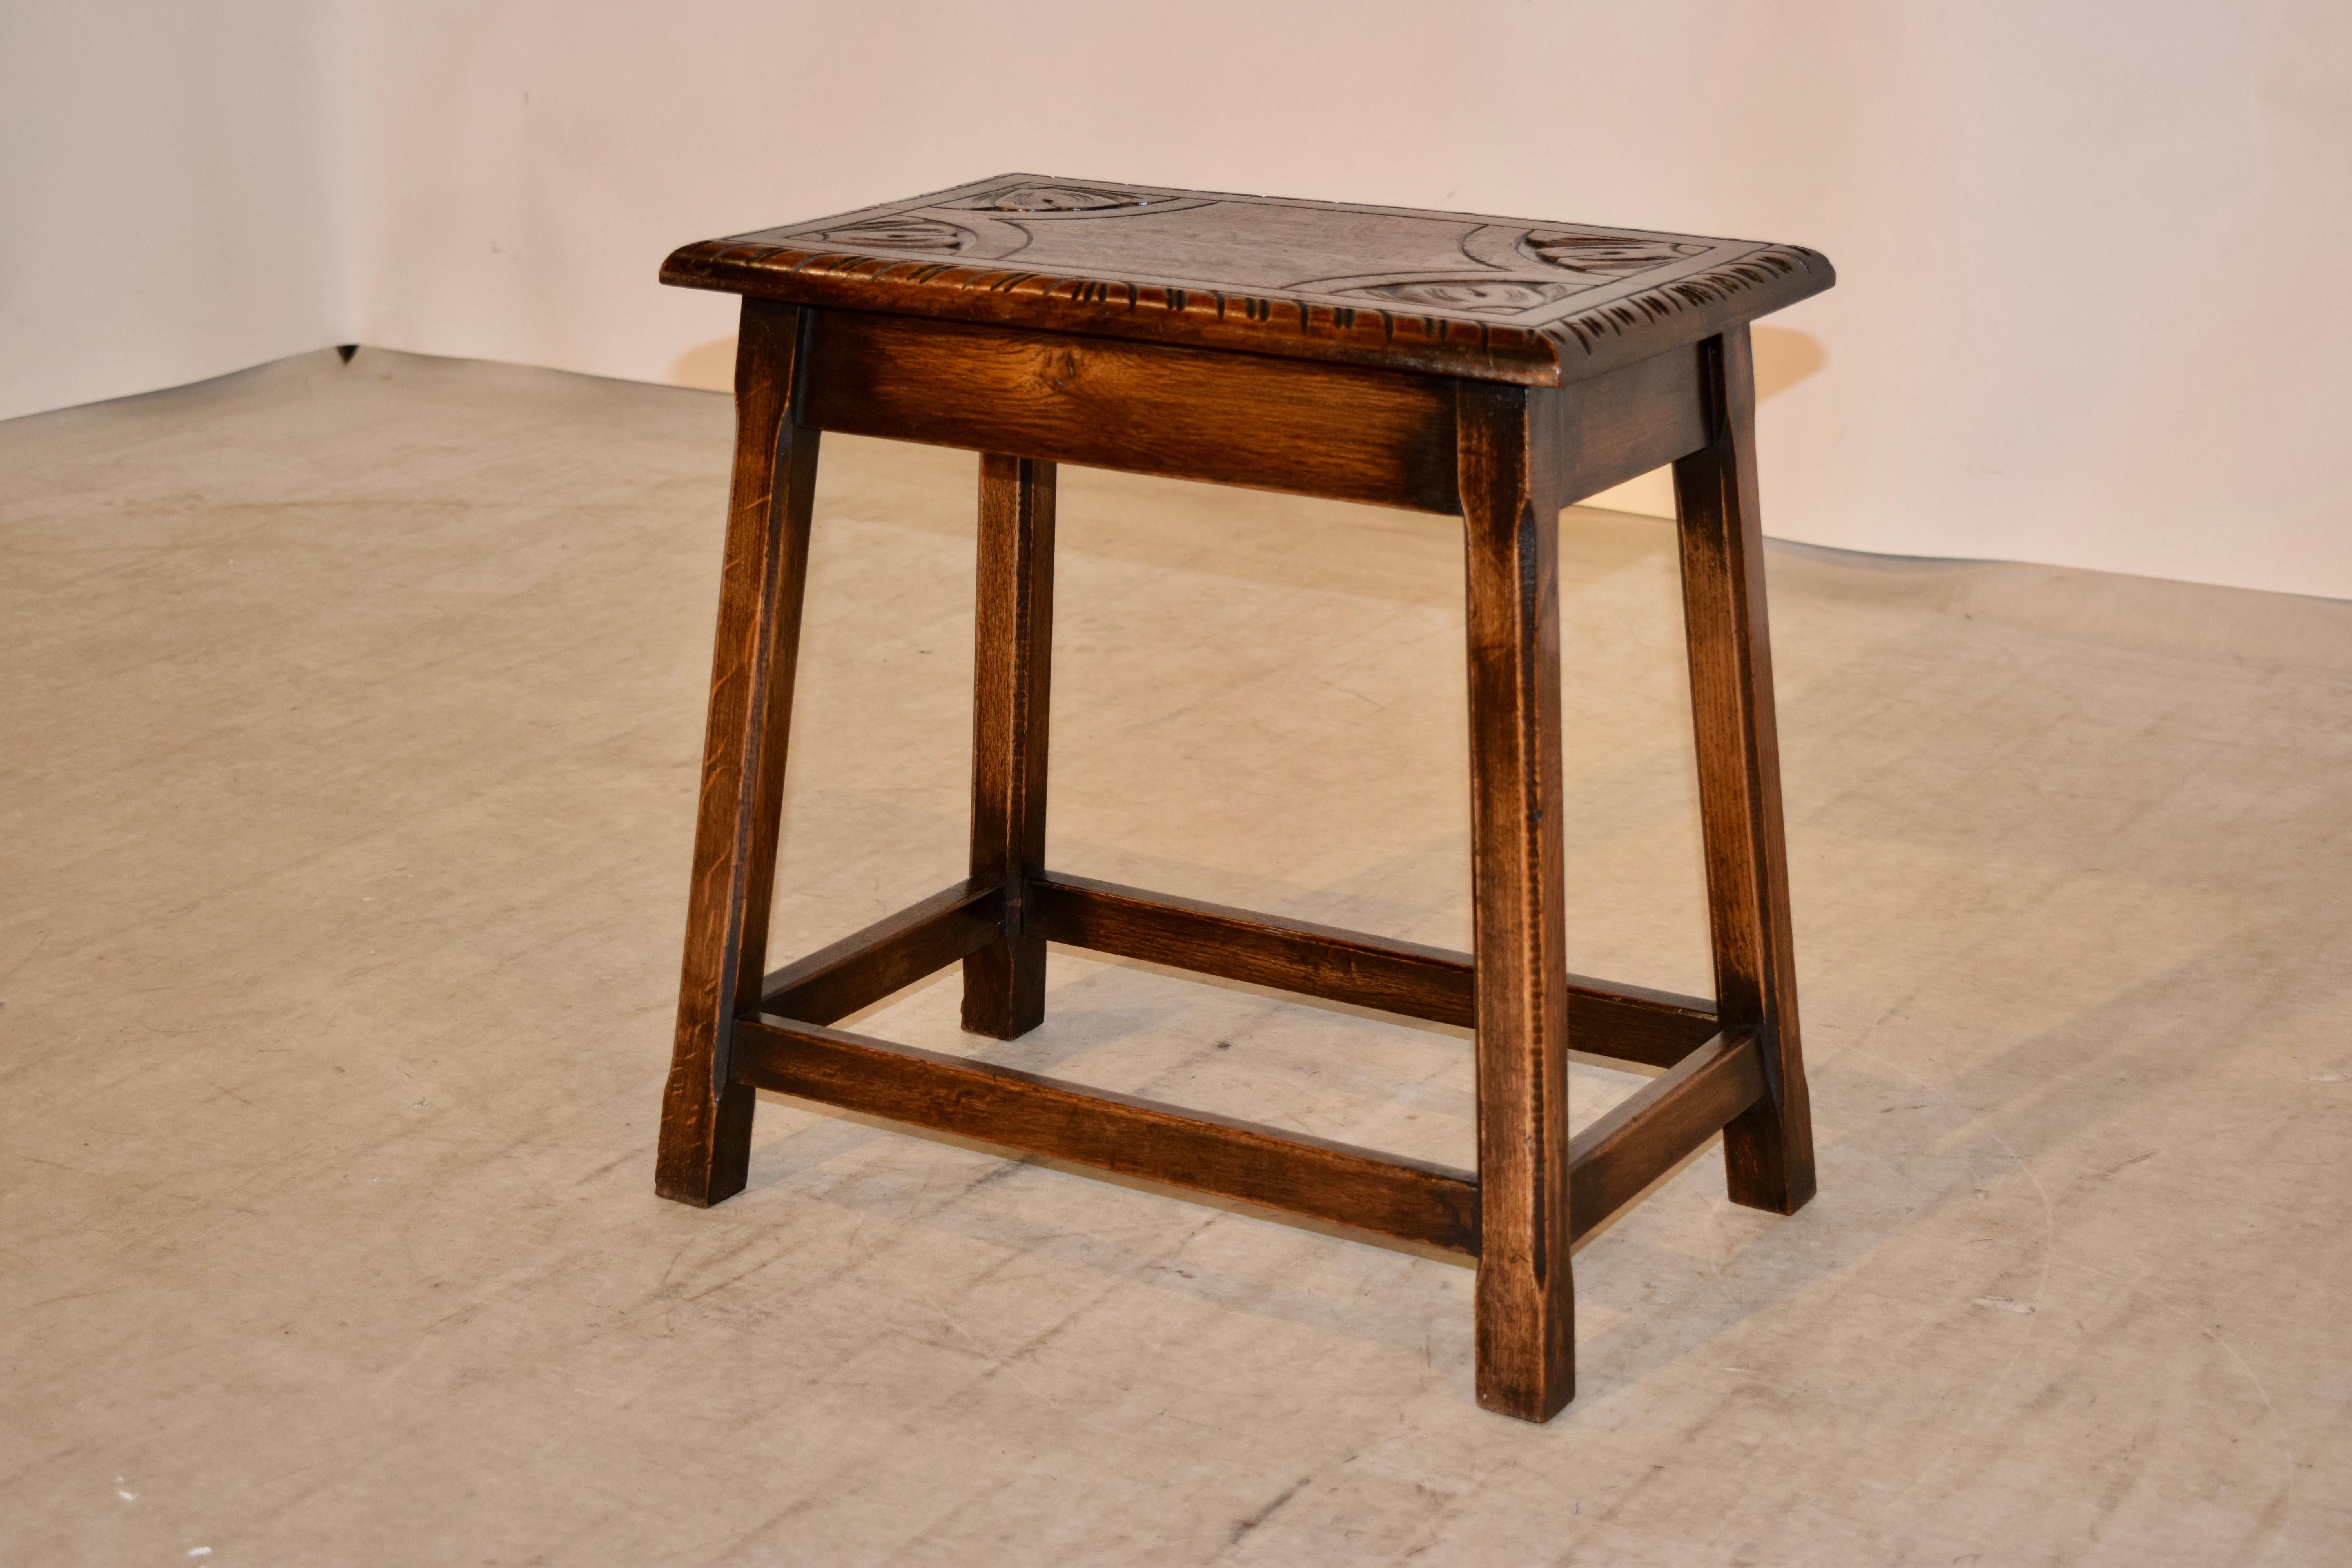 English oak stool circa 1900 with a hand carved decorated top following down to a simple apron and four splayed legs, all with routed corners, joined by simple stretchers.